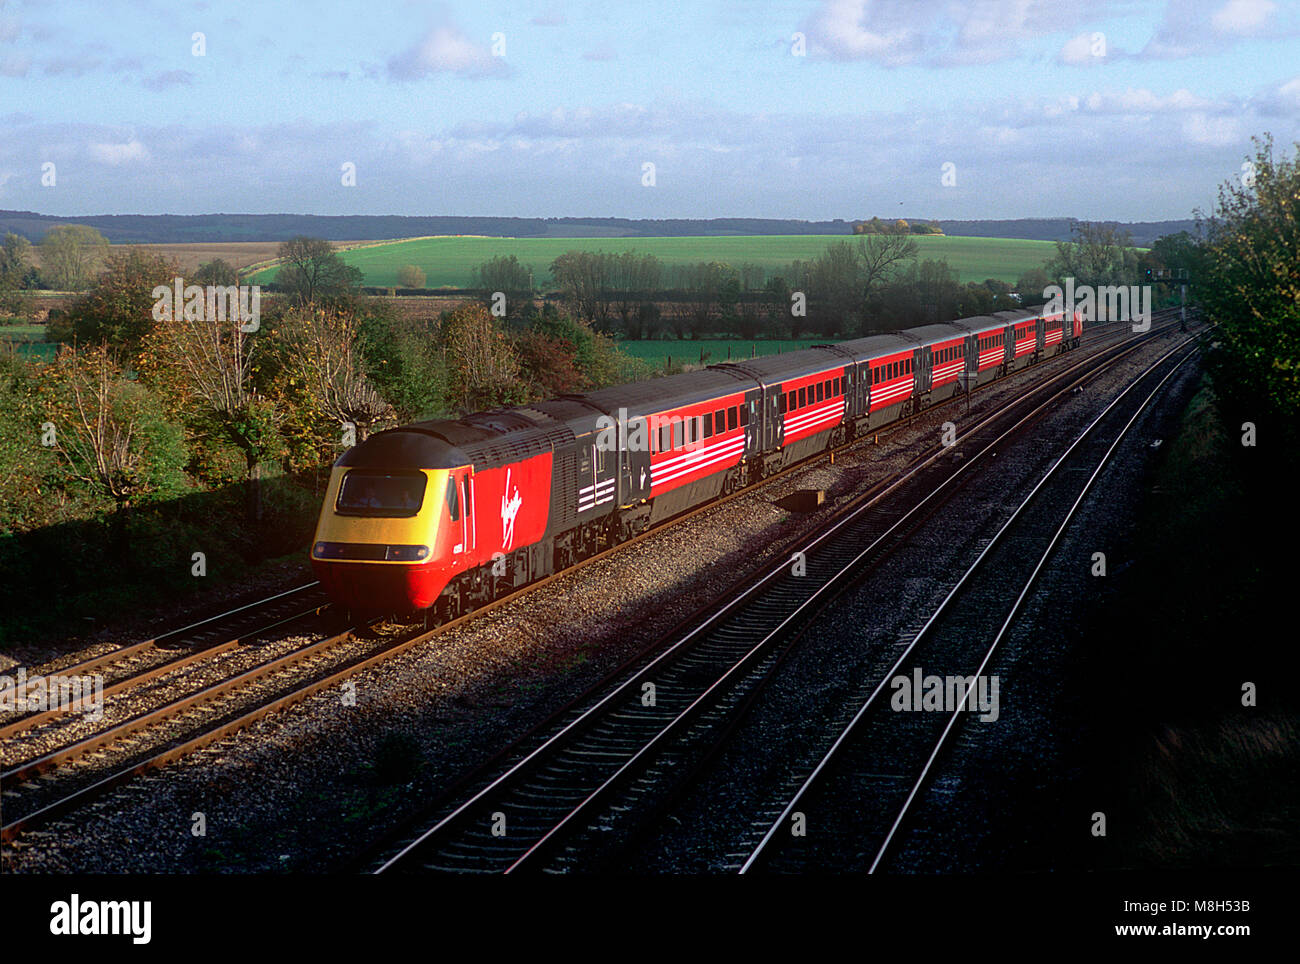 A Virgin Cross Country HST formed of power cars 43158 and 43071 at South Moreton on the Great Western Main Line on the 9th November 2001. Stock Photo